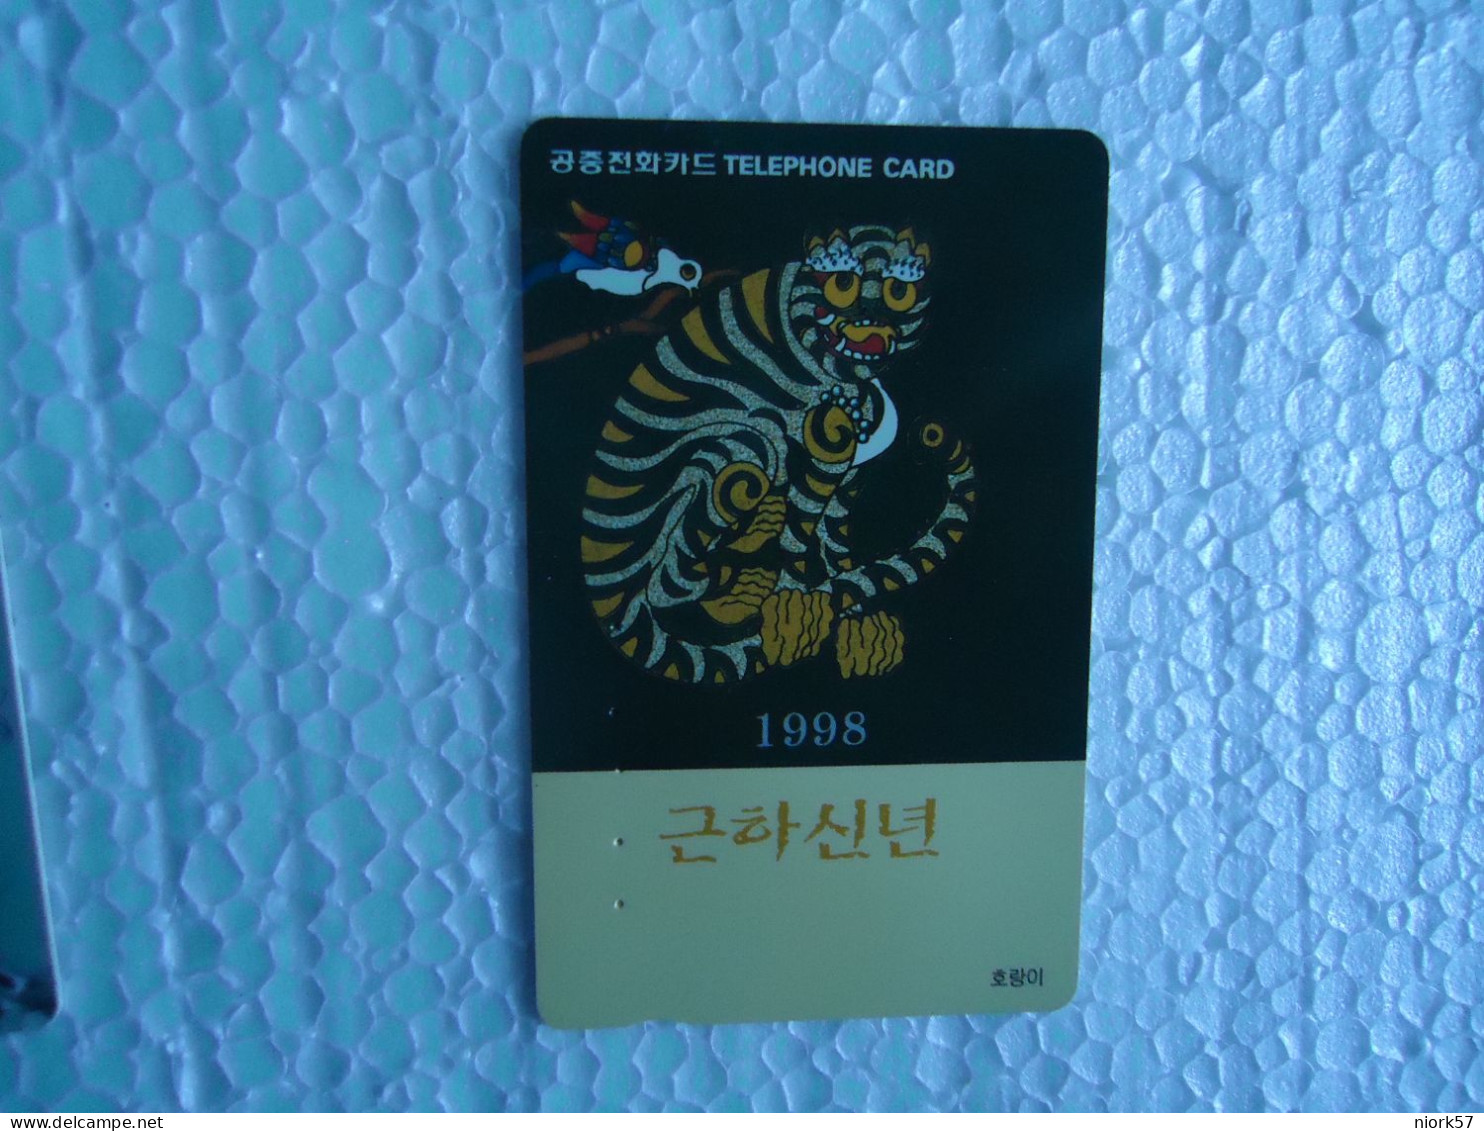 KOREA   USED CARDS  CHINESE YEAR TIGER - Dschungel